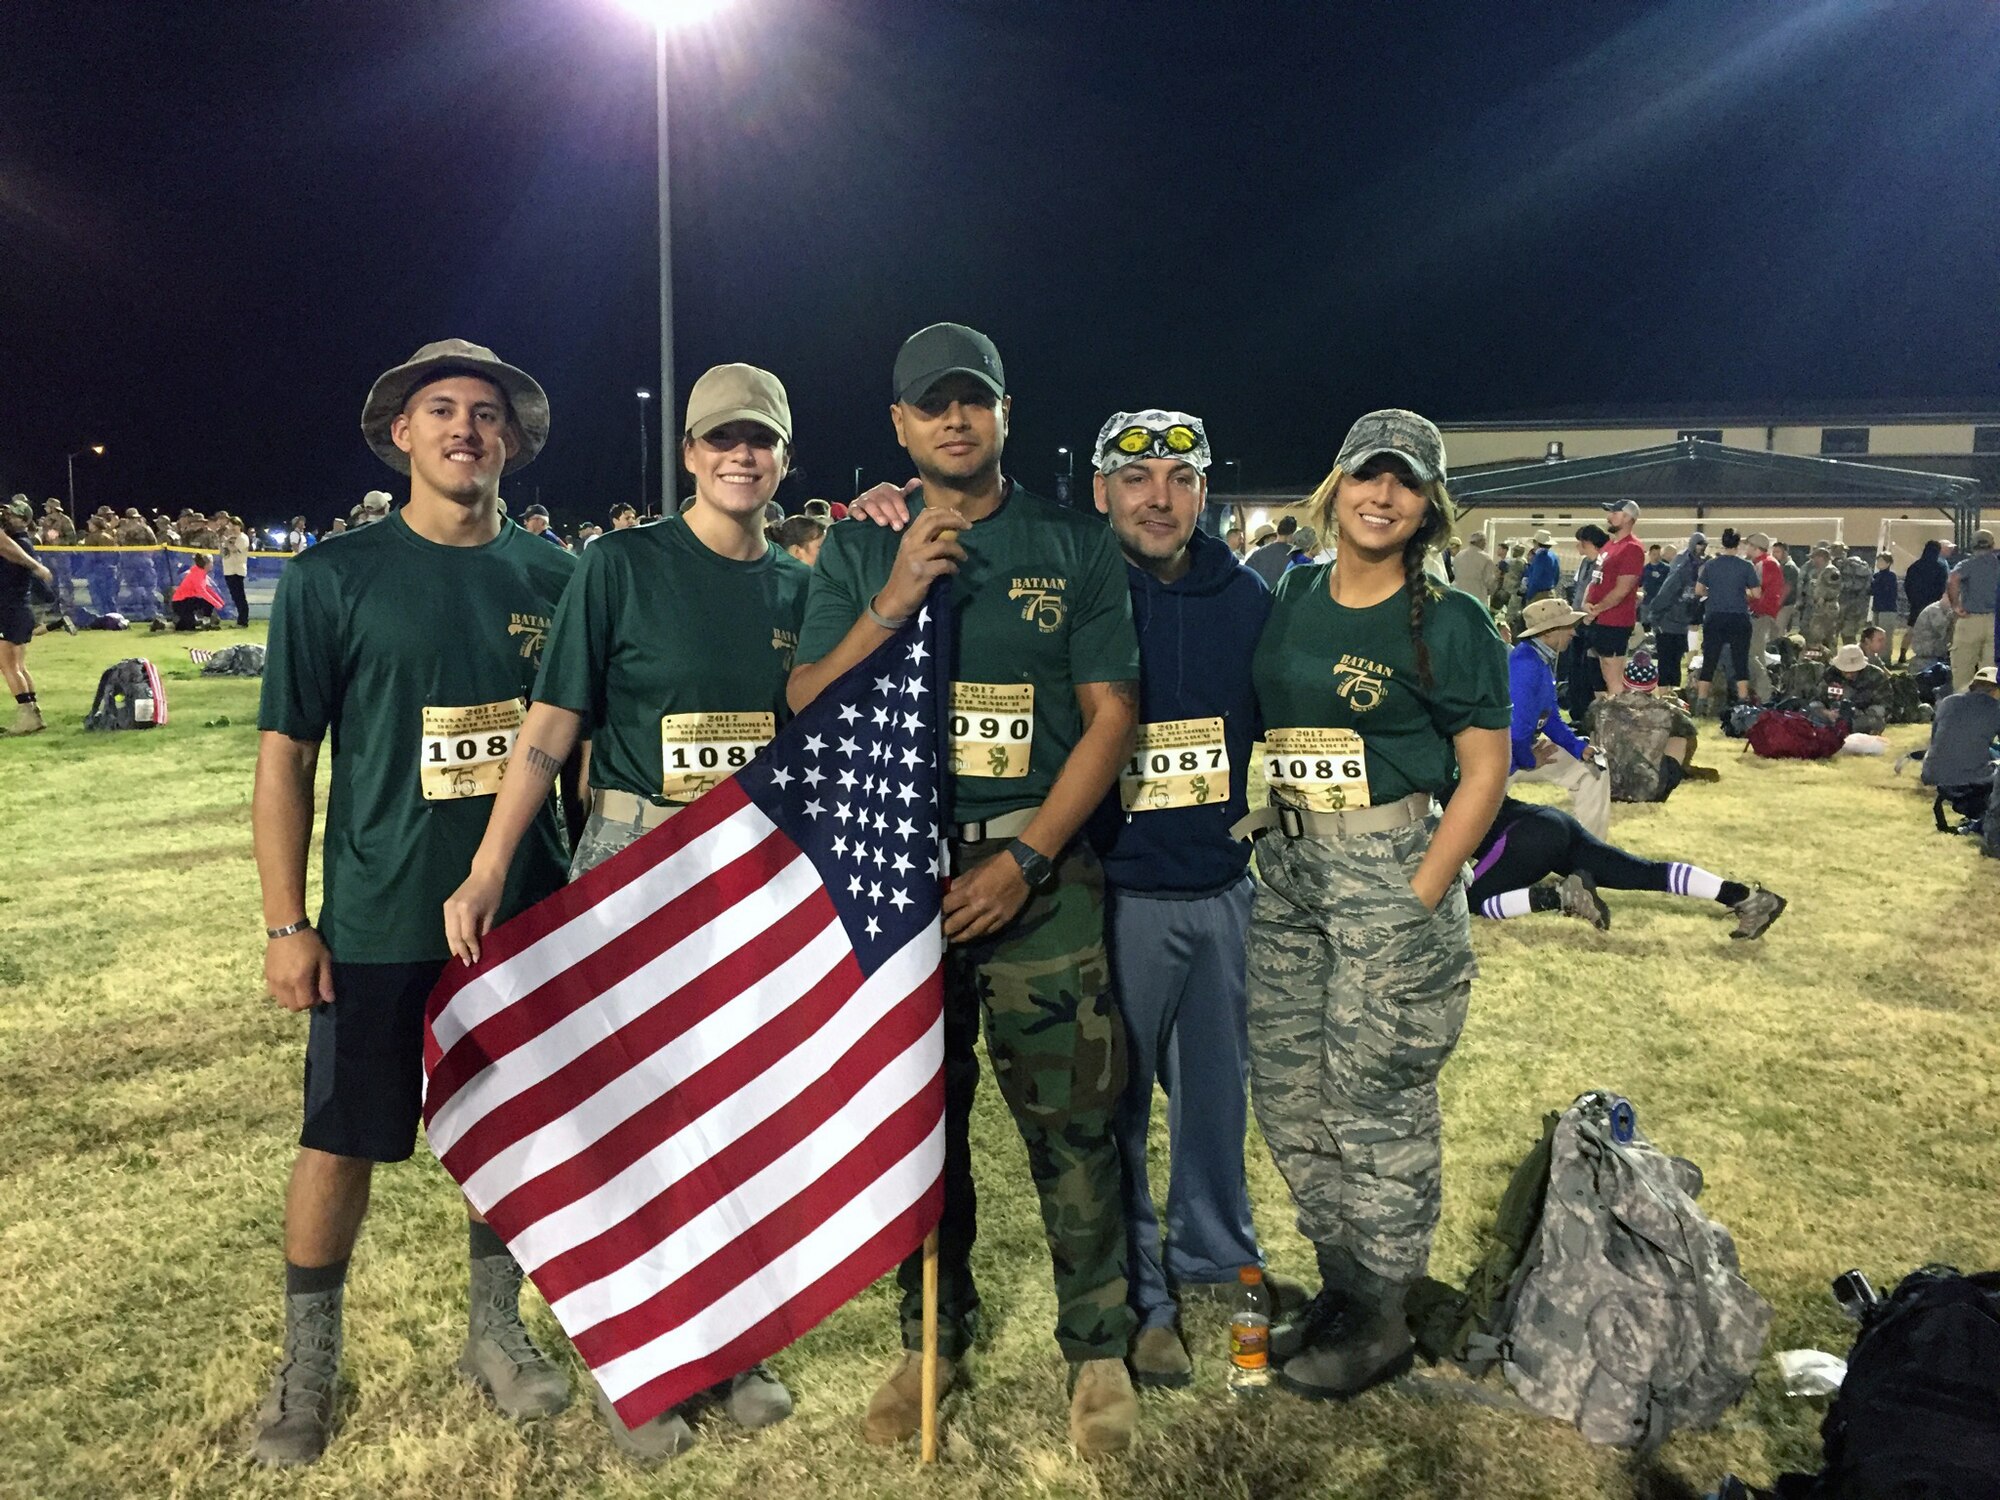 Senior Airman Jonathon Lych-Cay, Staff Sgt. Lynley Mainous, Master Sgt. Jonathon Nossa, Master Sgt. Chad Kelly and Tech. Sgt. Kaitlyn Barone complete the 26.2 mile ruck march as part of the Bataan Death March, White Sands NM, March 19.
Participants were required to wear 35 pound back packs during the event.